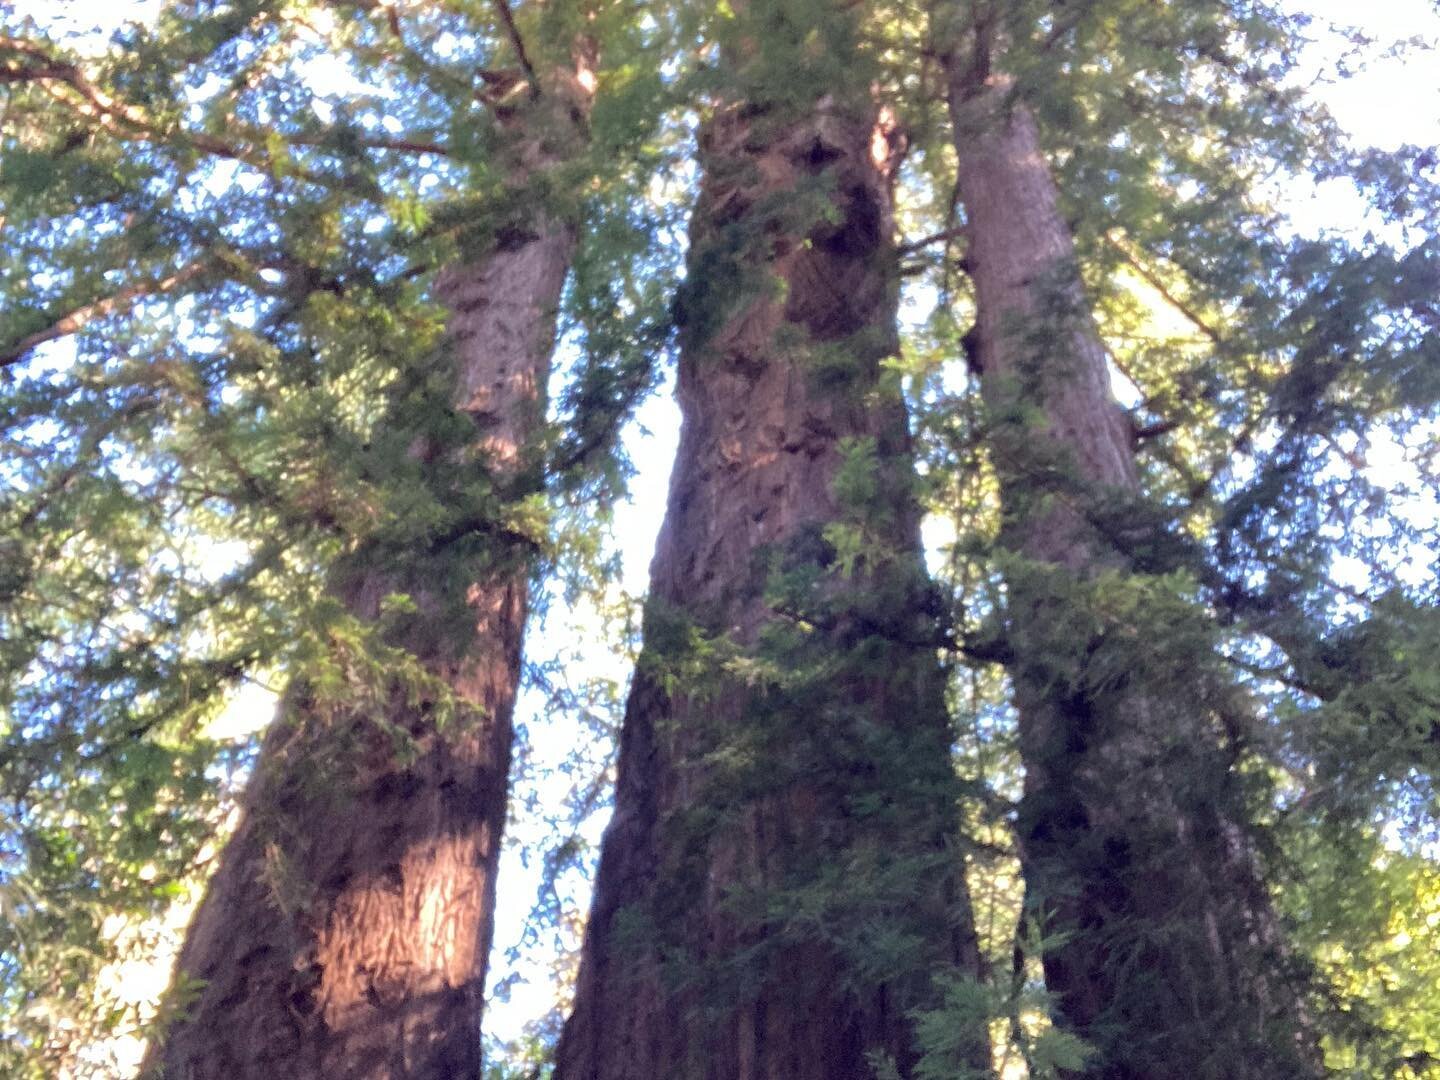 Redwood forest. These giant trees are so beautiful.